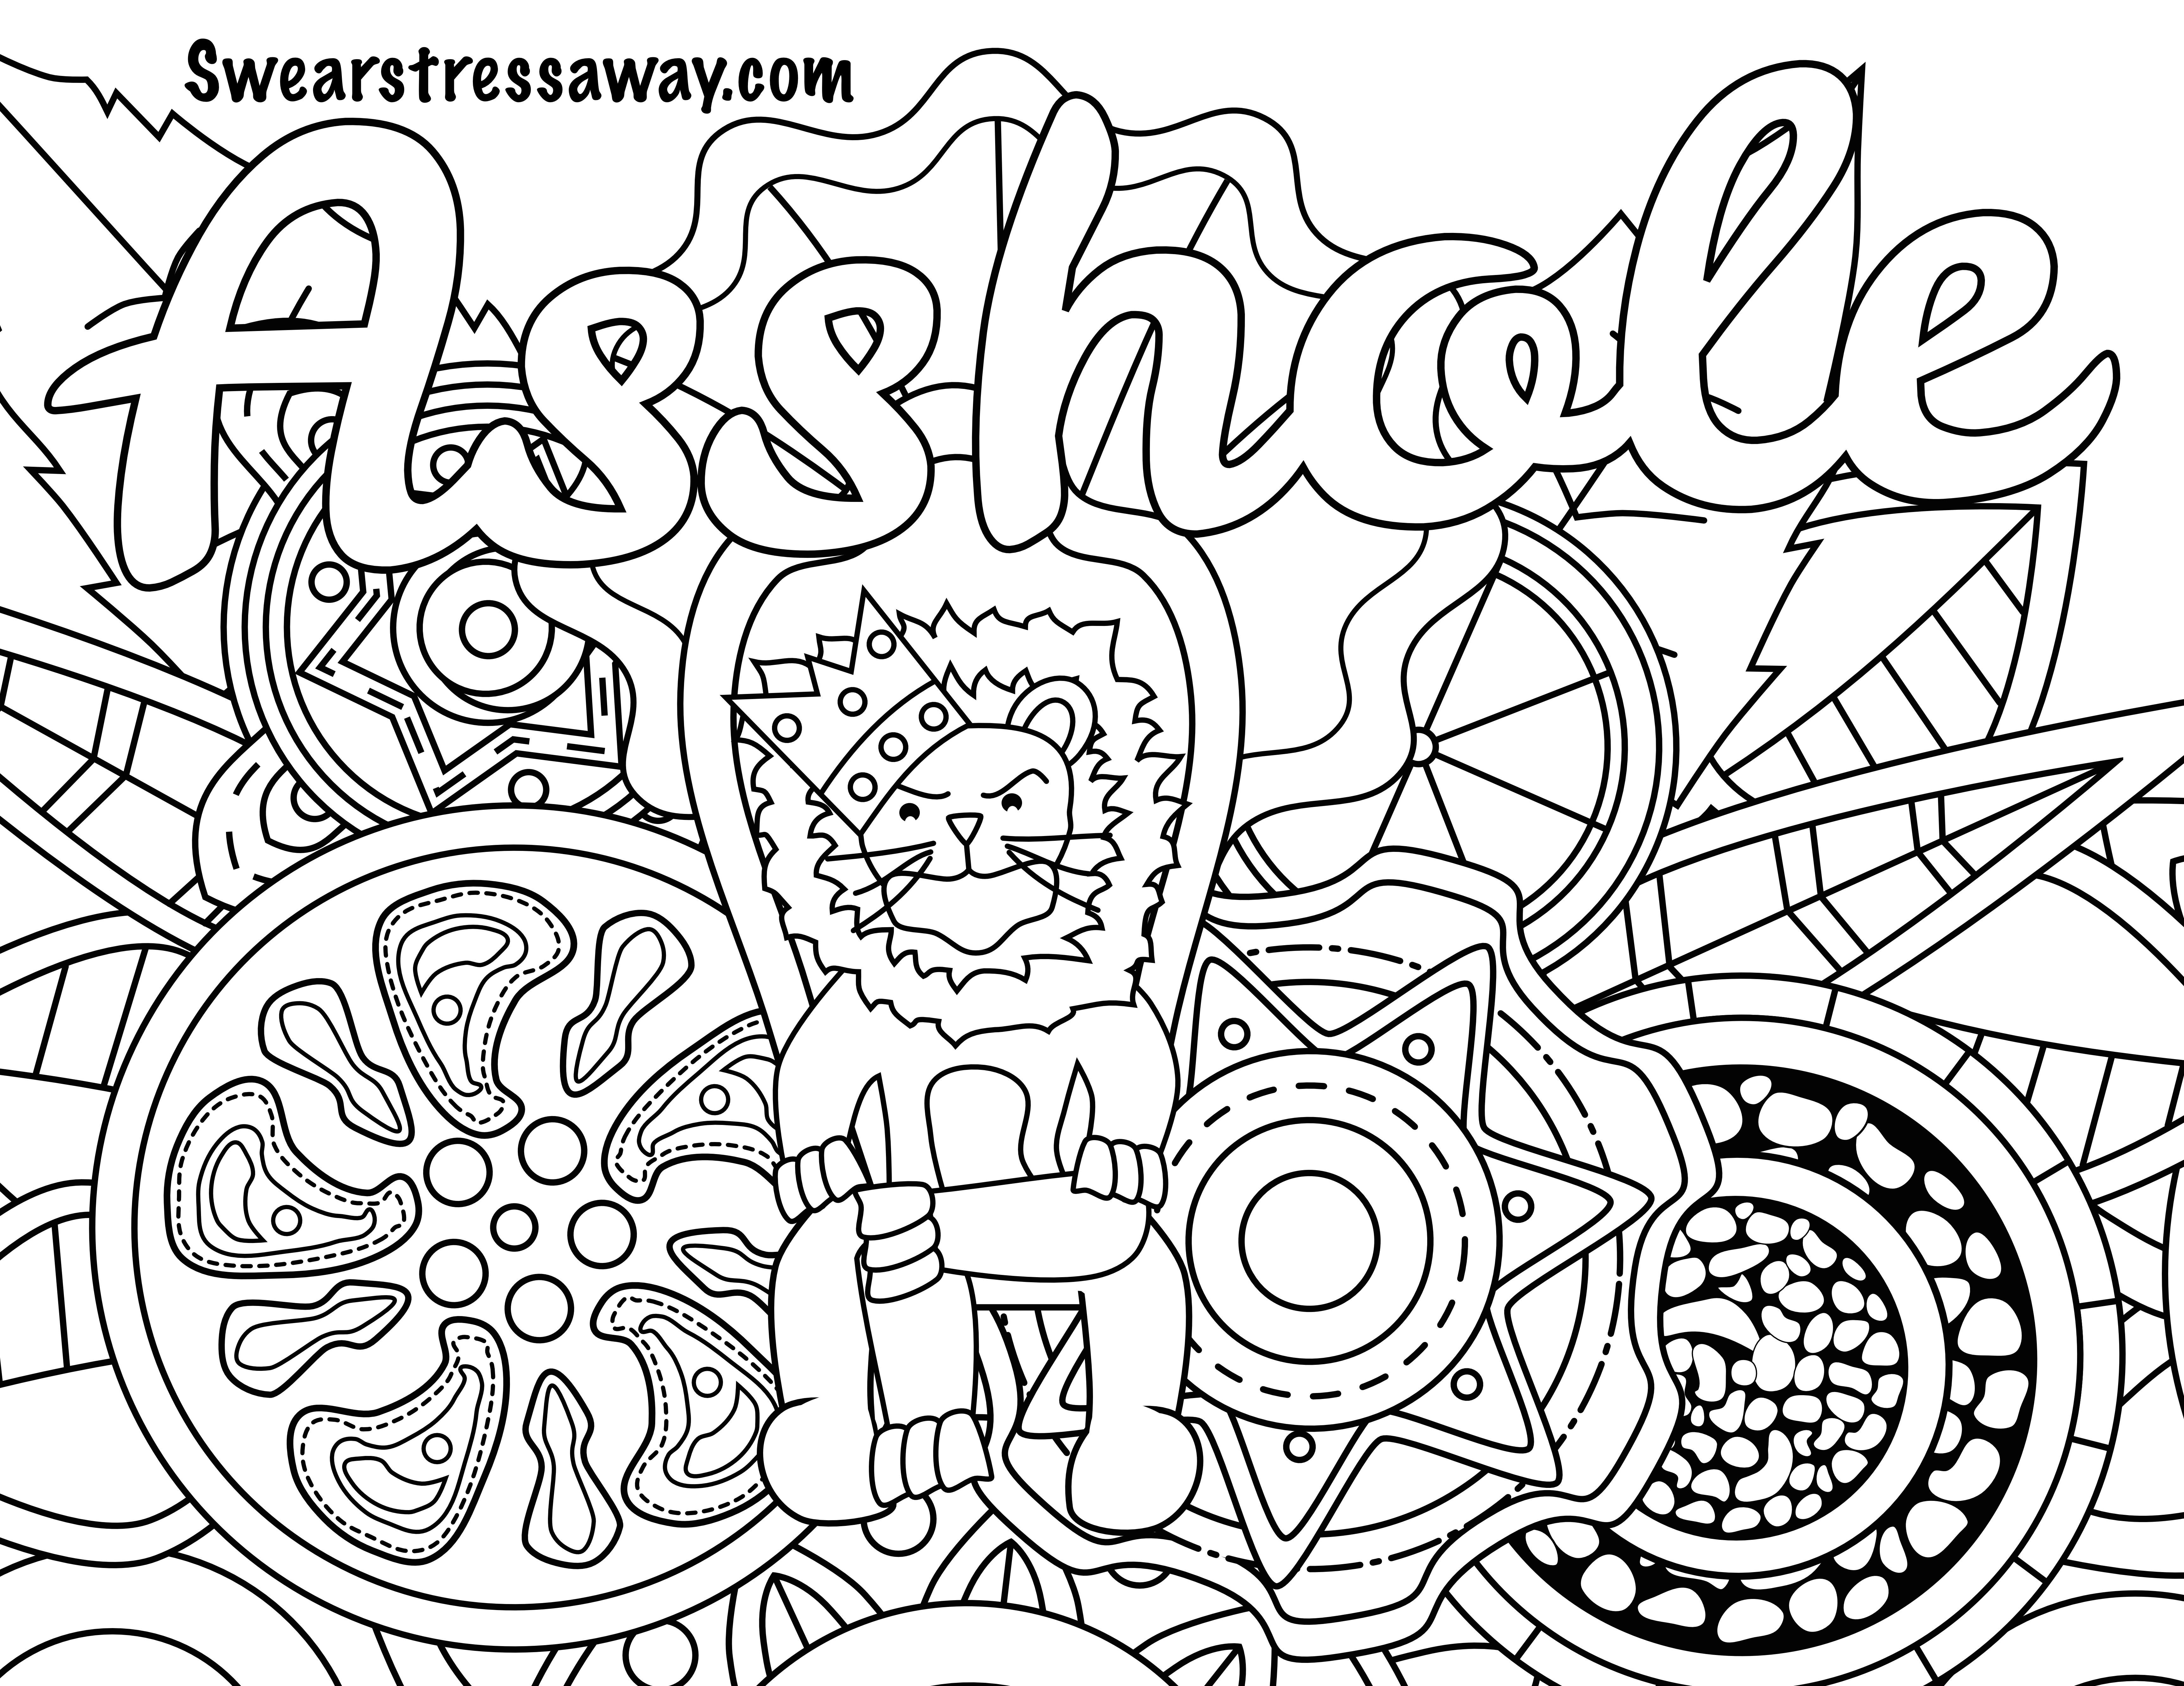 Asshole Coloring Book
 Asshole Swear Word Coloring Page Adult Coloring Page